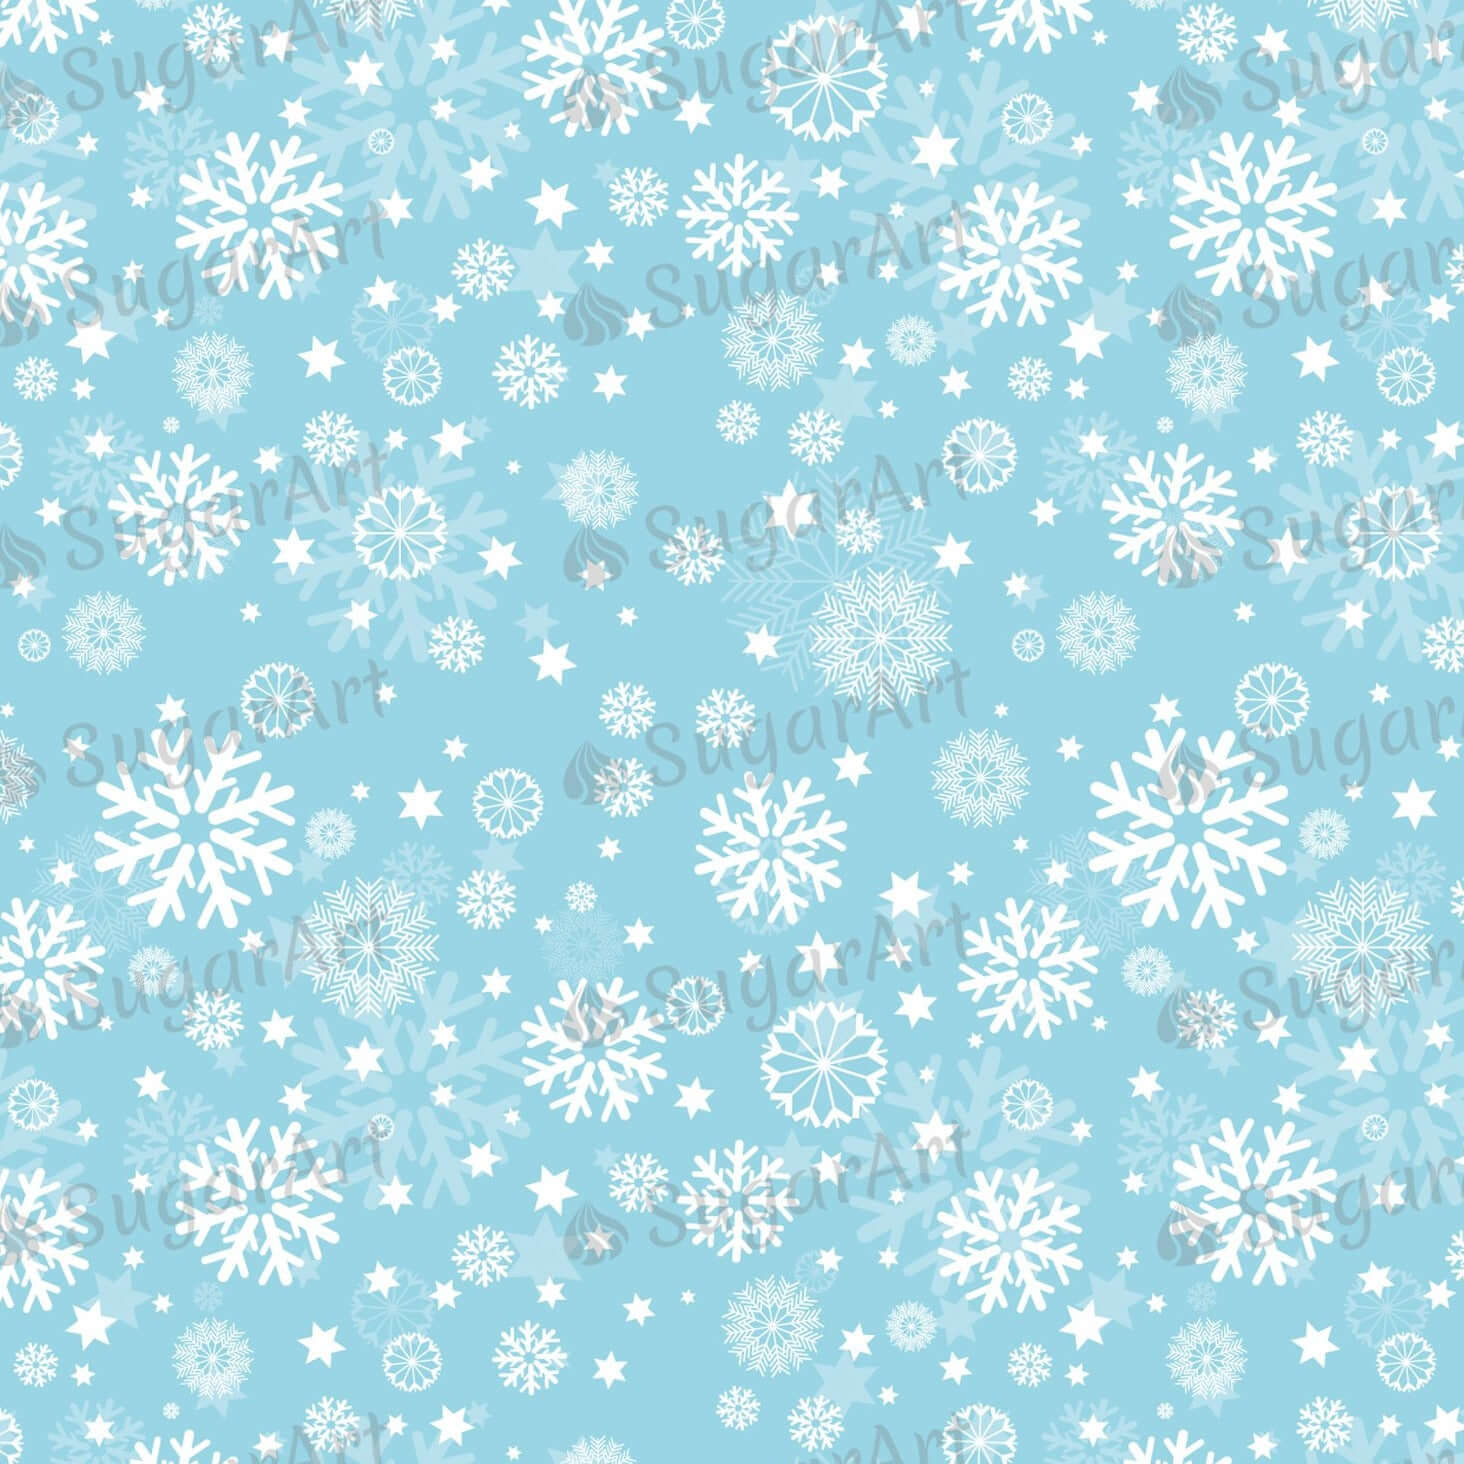 White Snowflakes on Blue Background - Icing - ISA184.